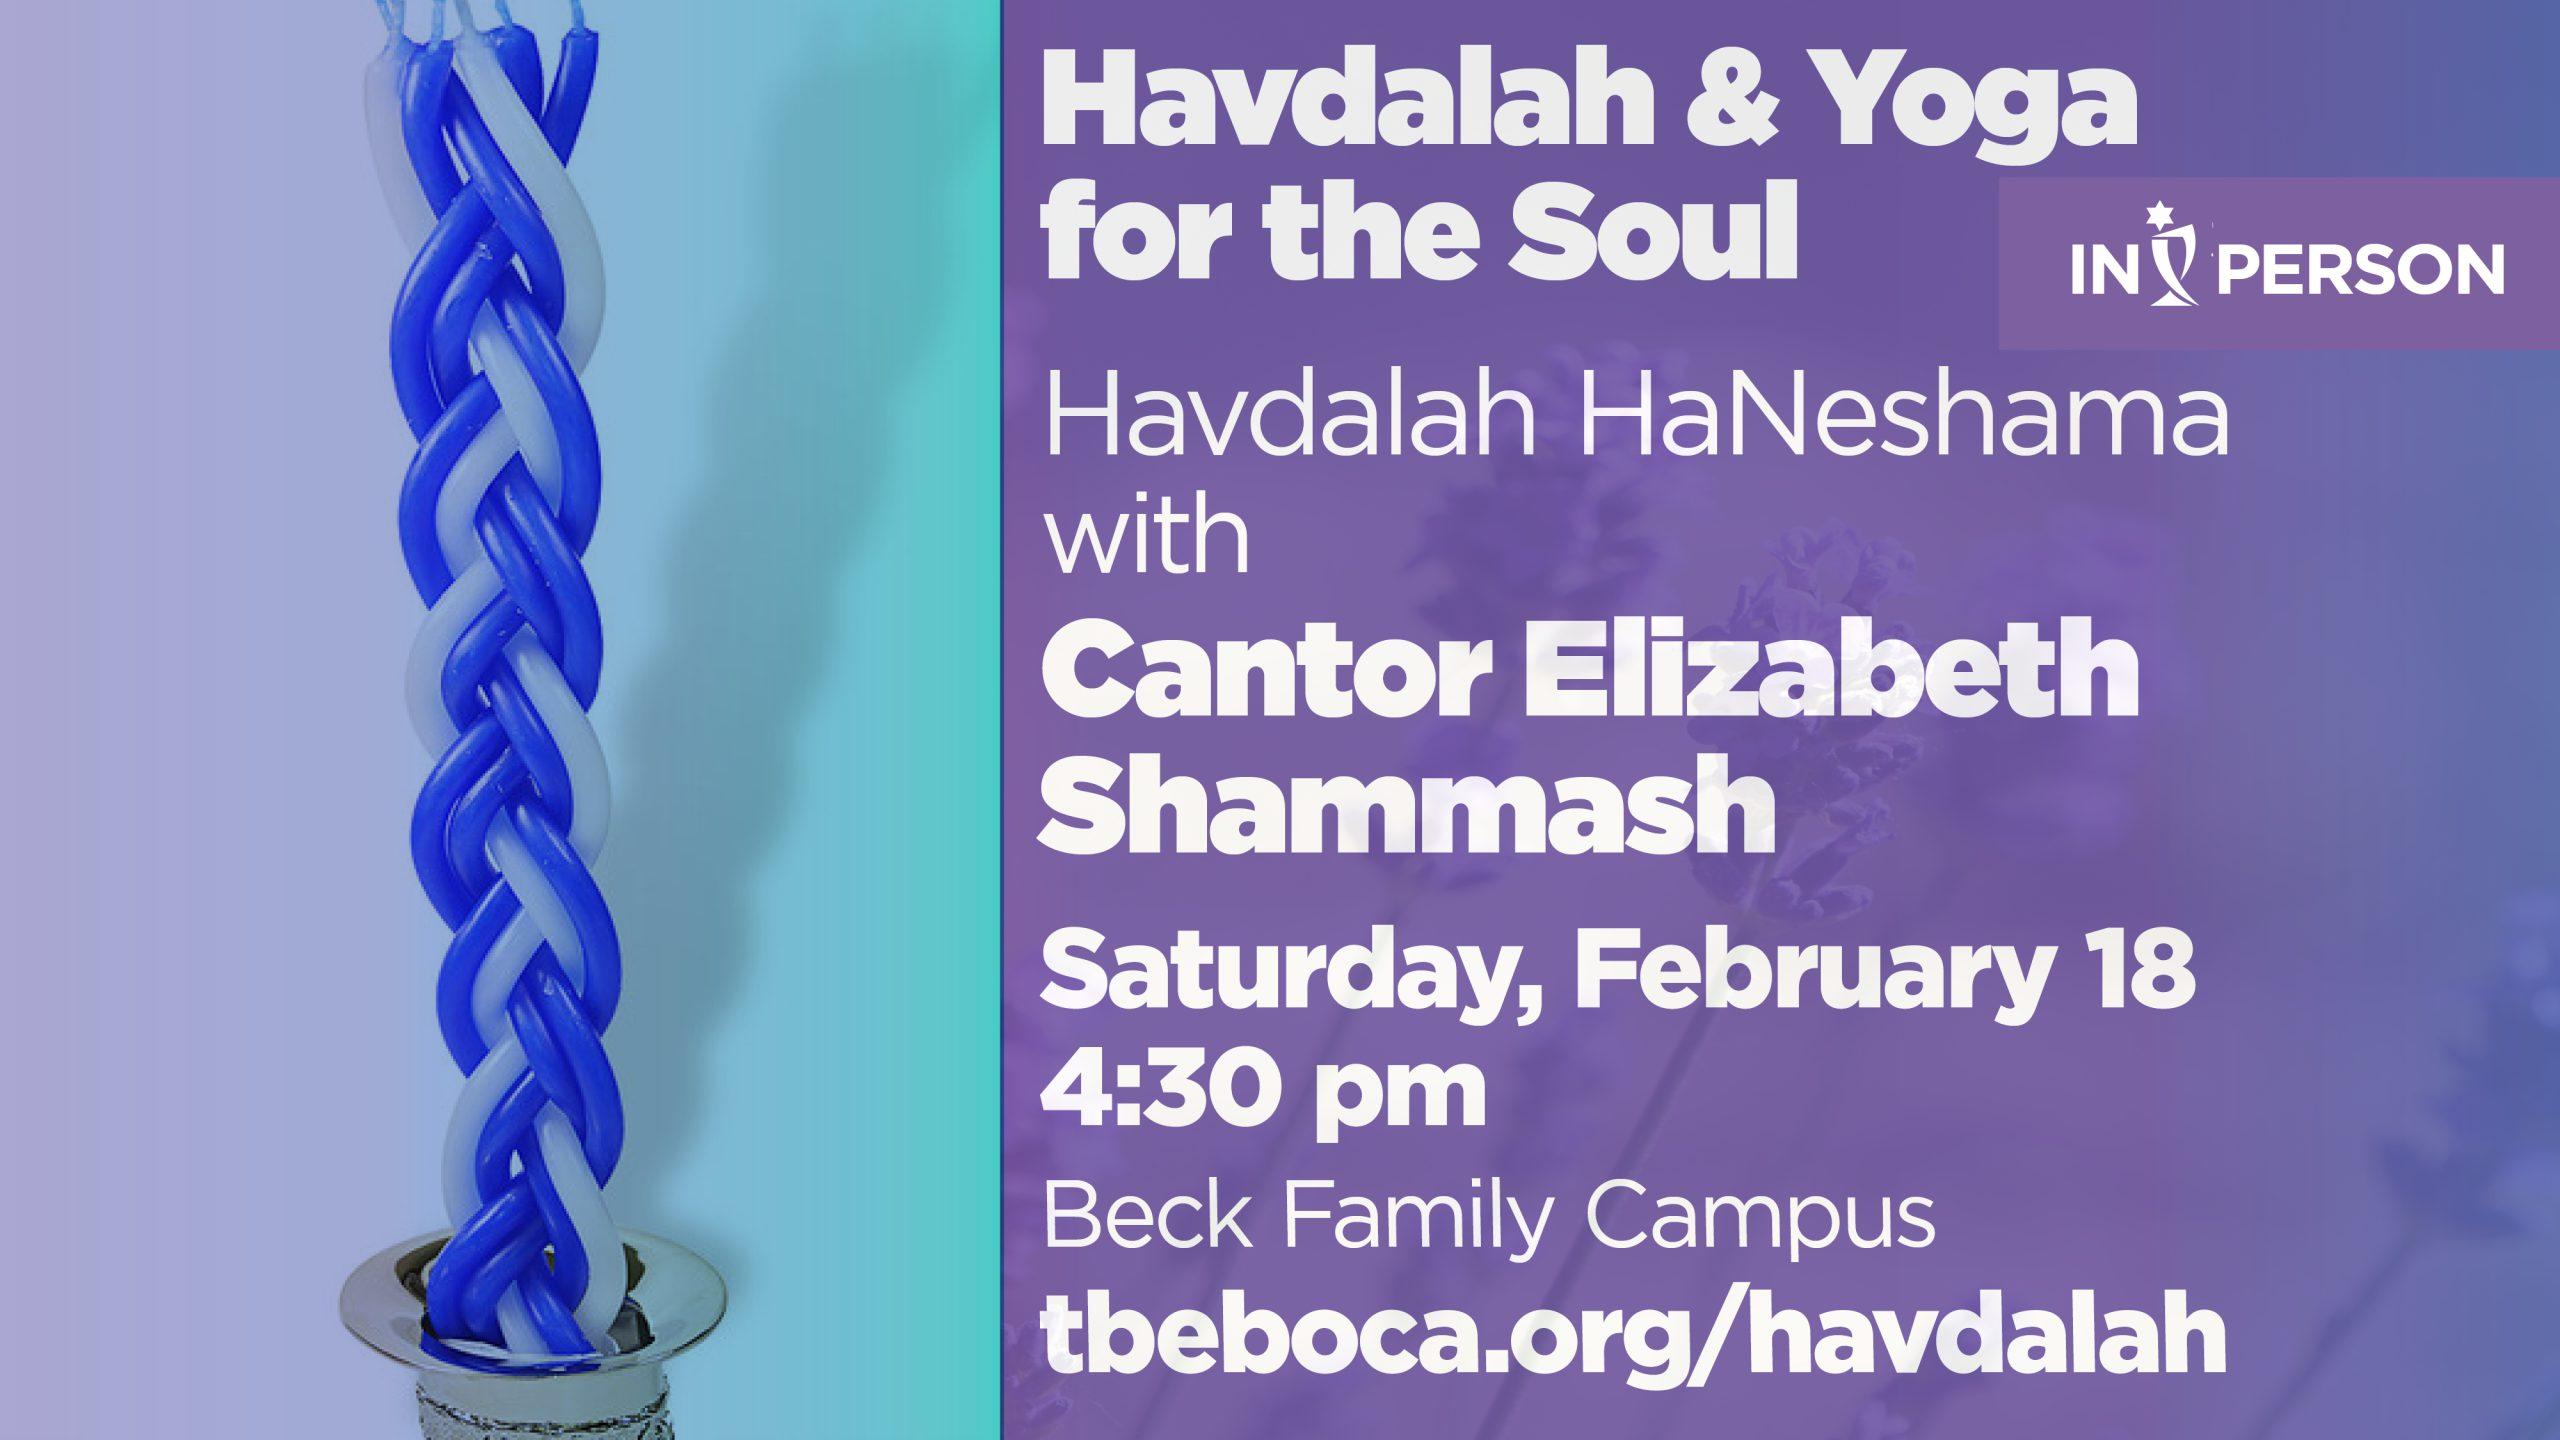 Havdalah and Yoga for the Soul with Cantor Elizabeth Shammash, event graphic for Temple Beth El of Boca Raton